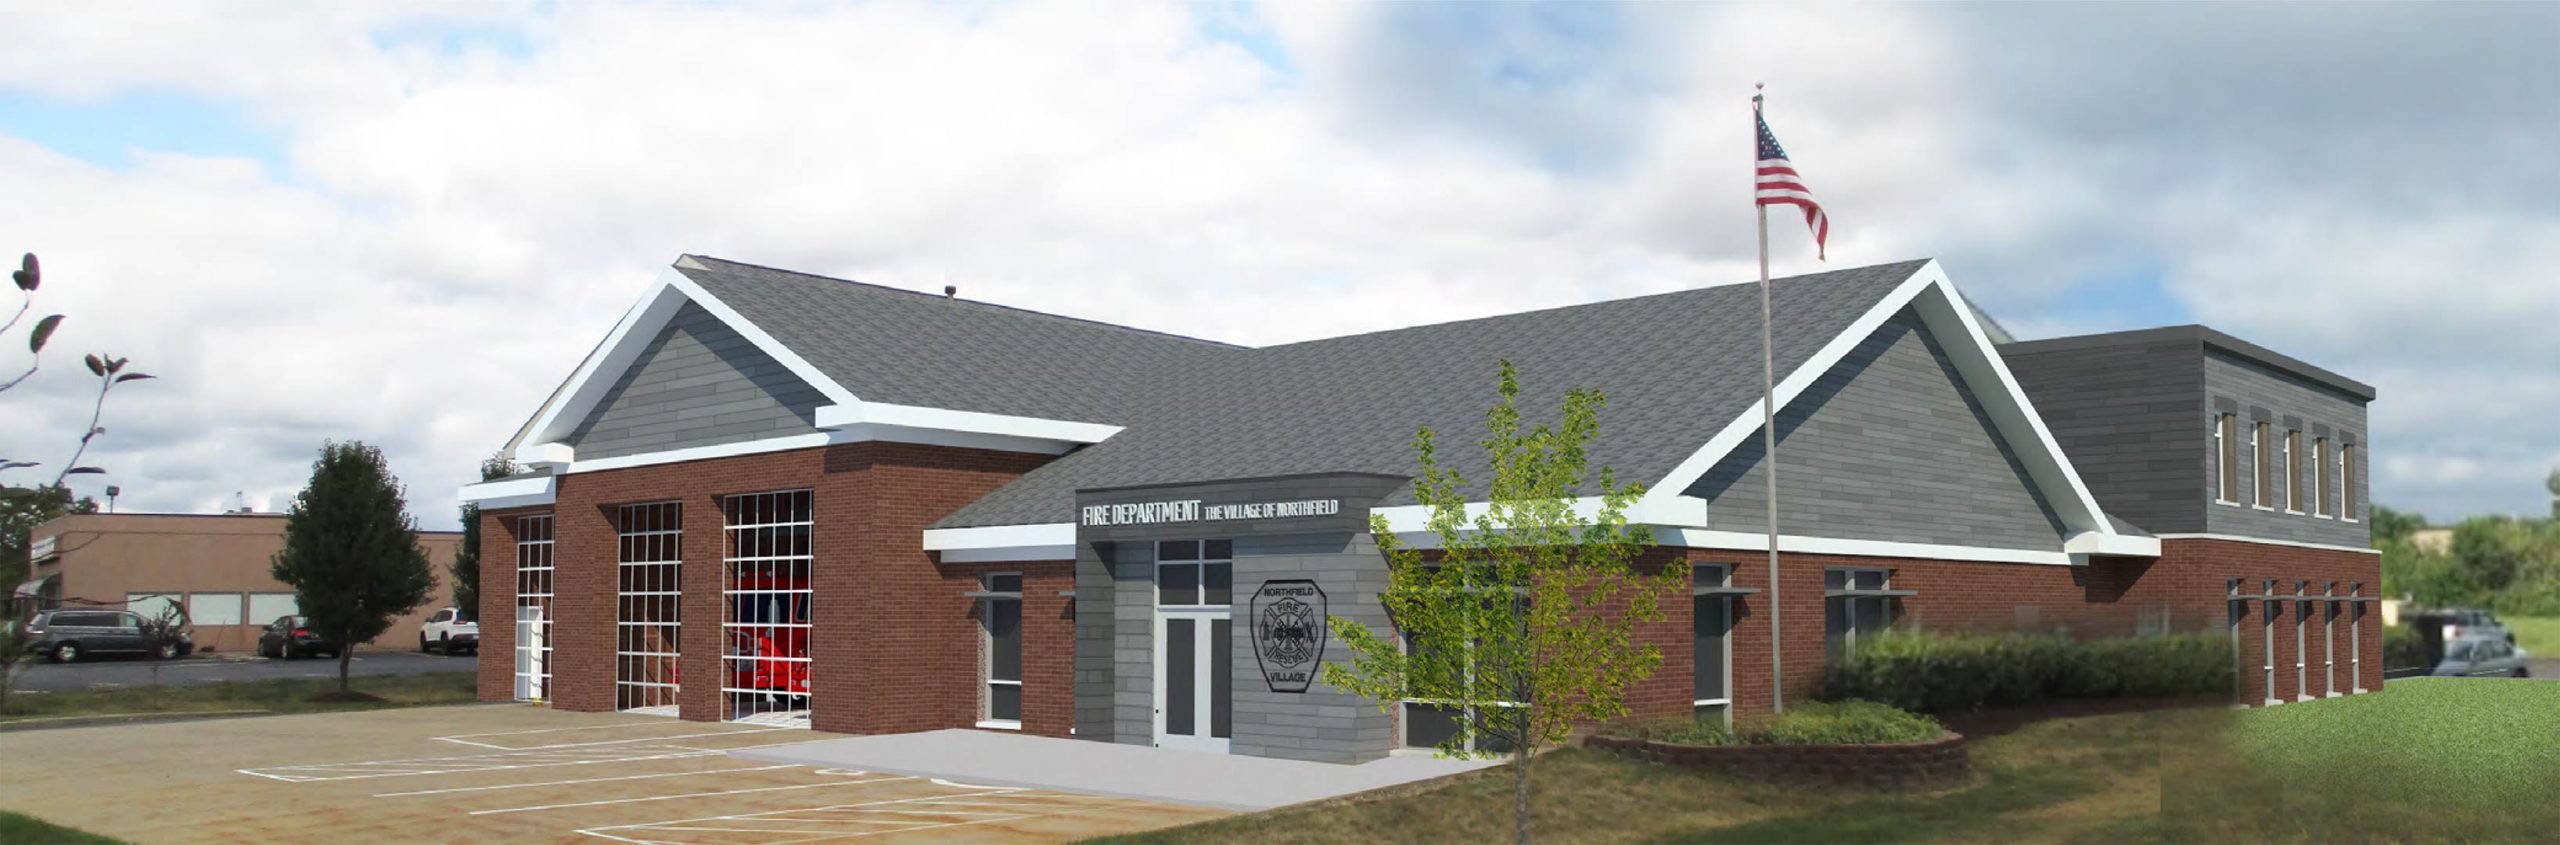 Exterior rendering of proposed fire department